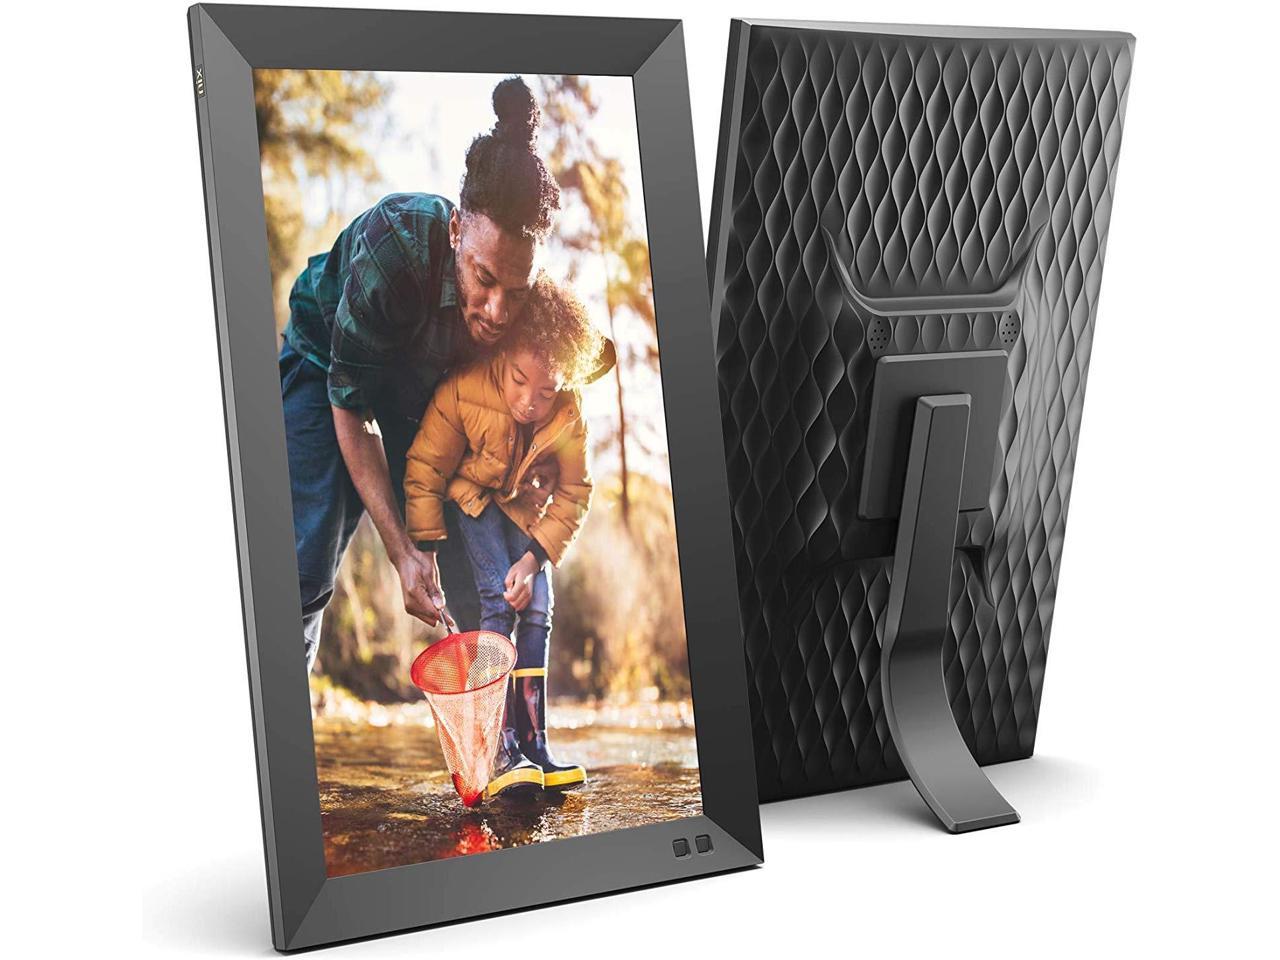 NIX 15 Inch Full HD Digital Photo Frame - Portrait or Landscape Stand, Auto-Rotate, Magnetic Remote Control, USB/SD Card Supported